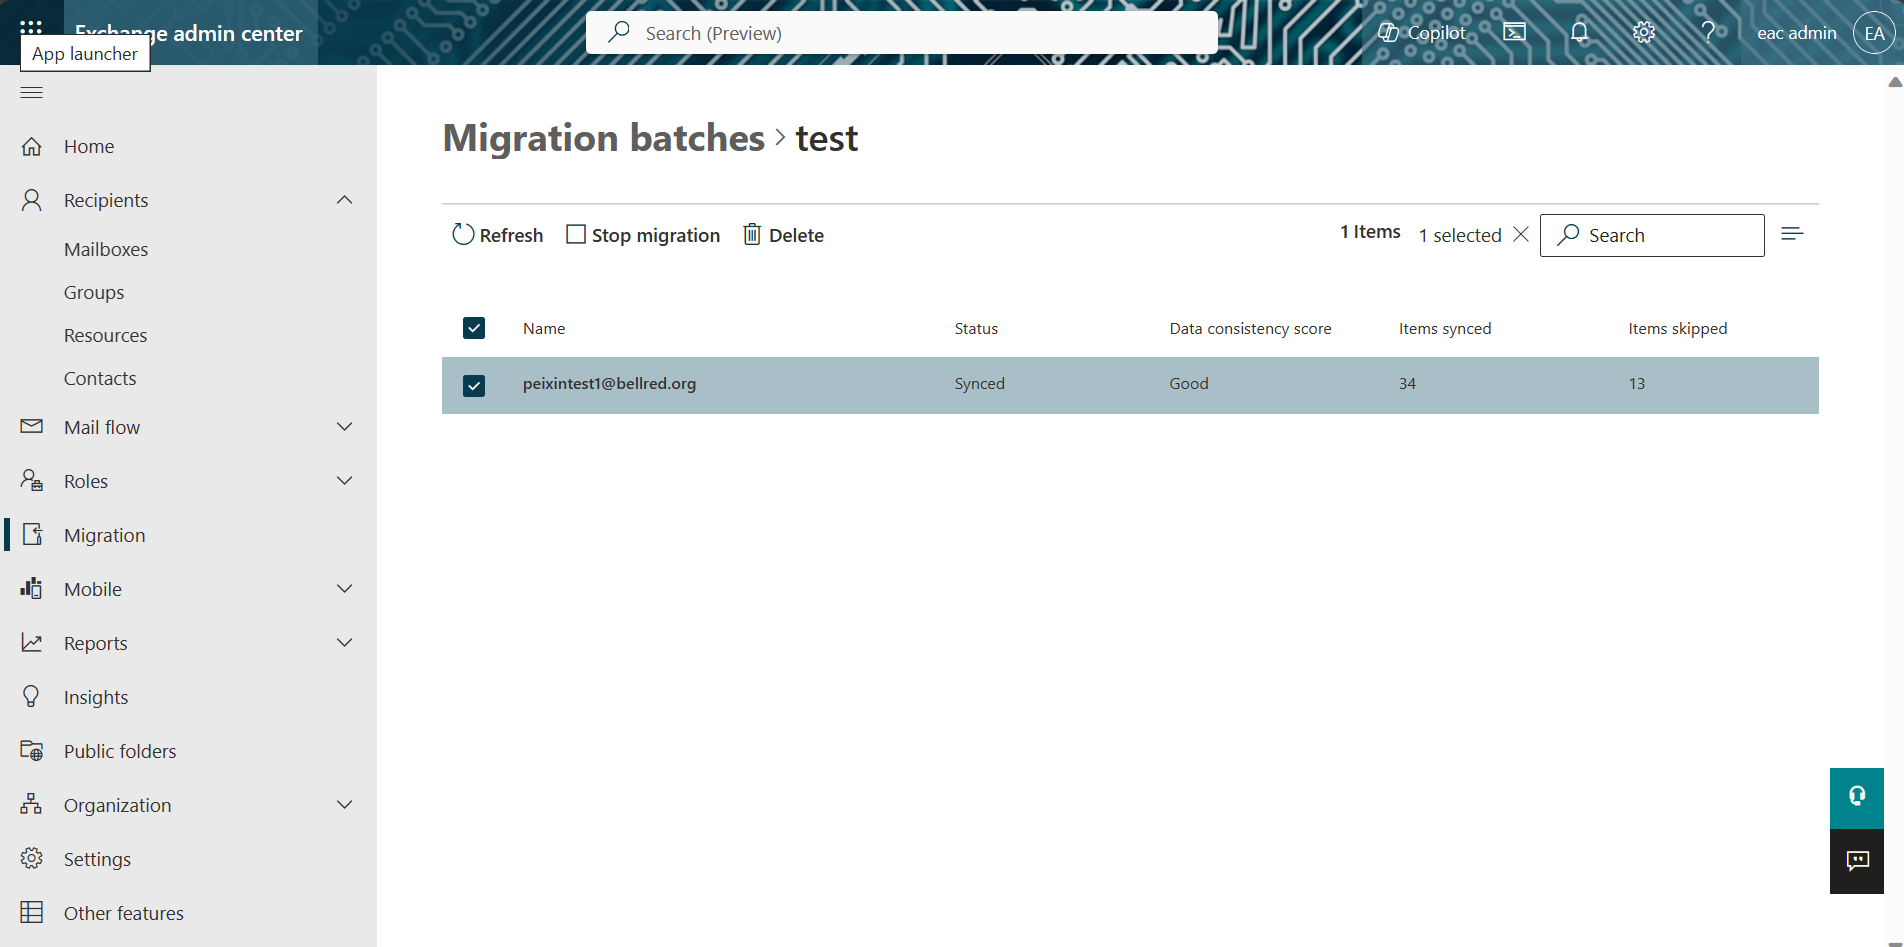 Screenshot of the EAC showing the specific page for the migration batch.